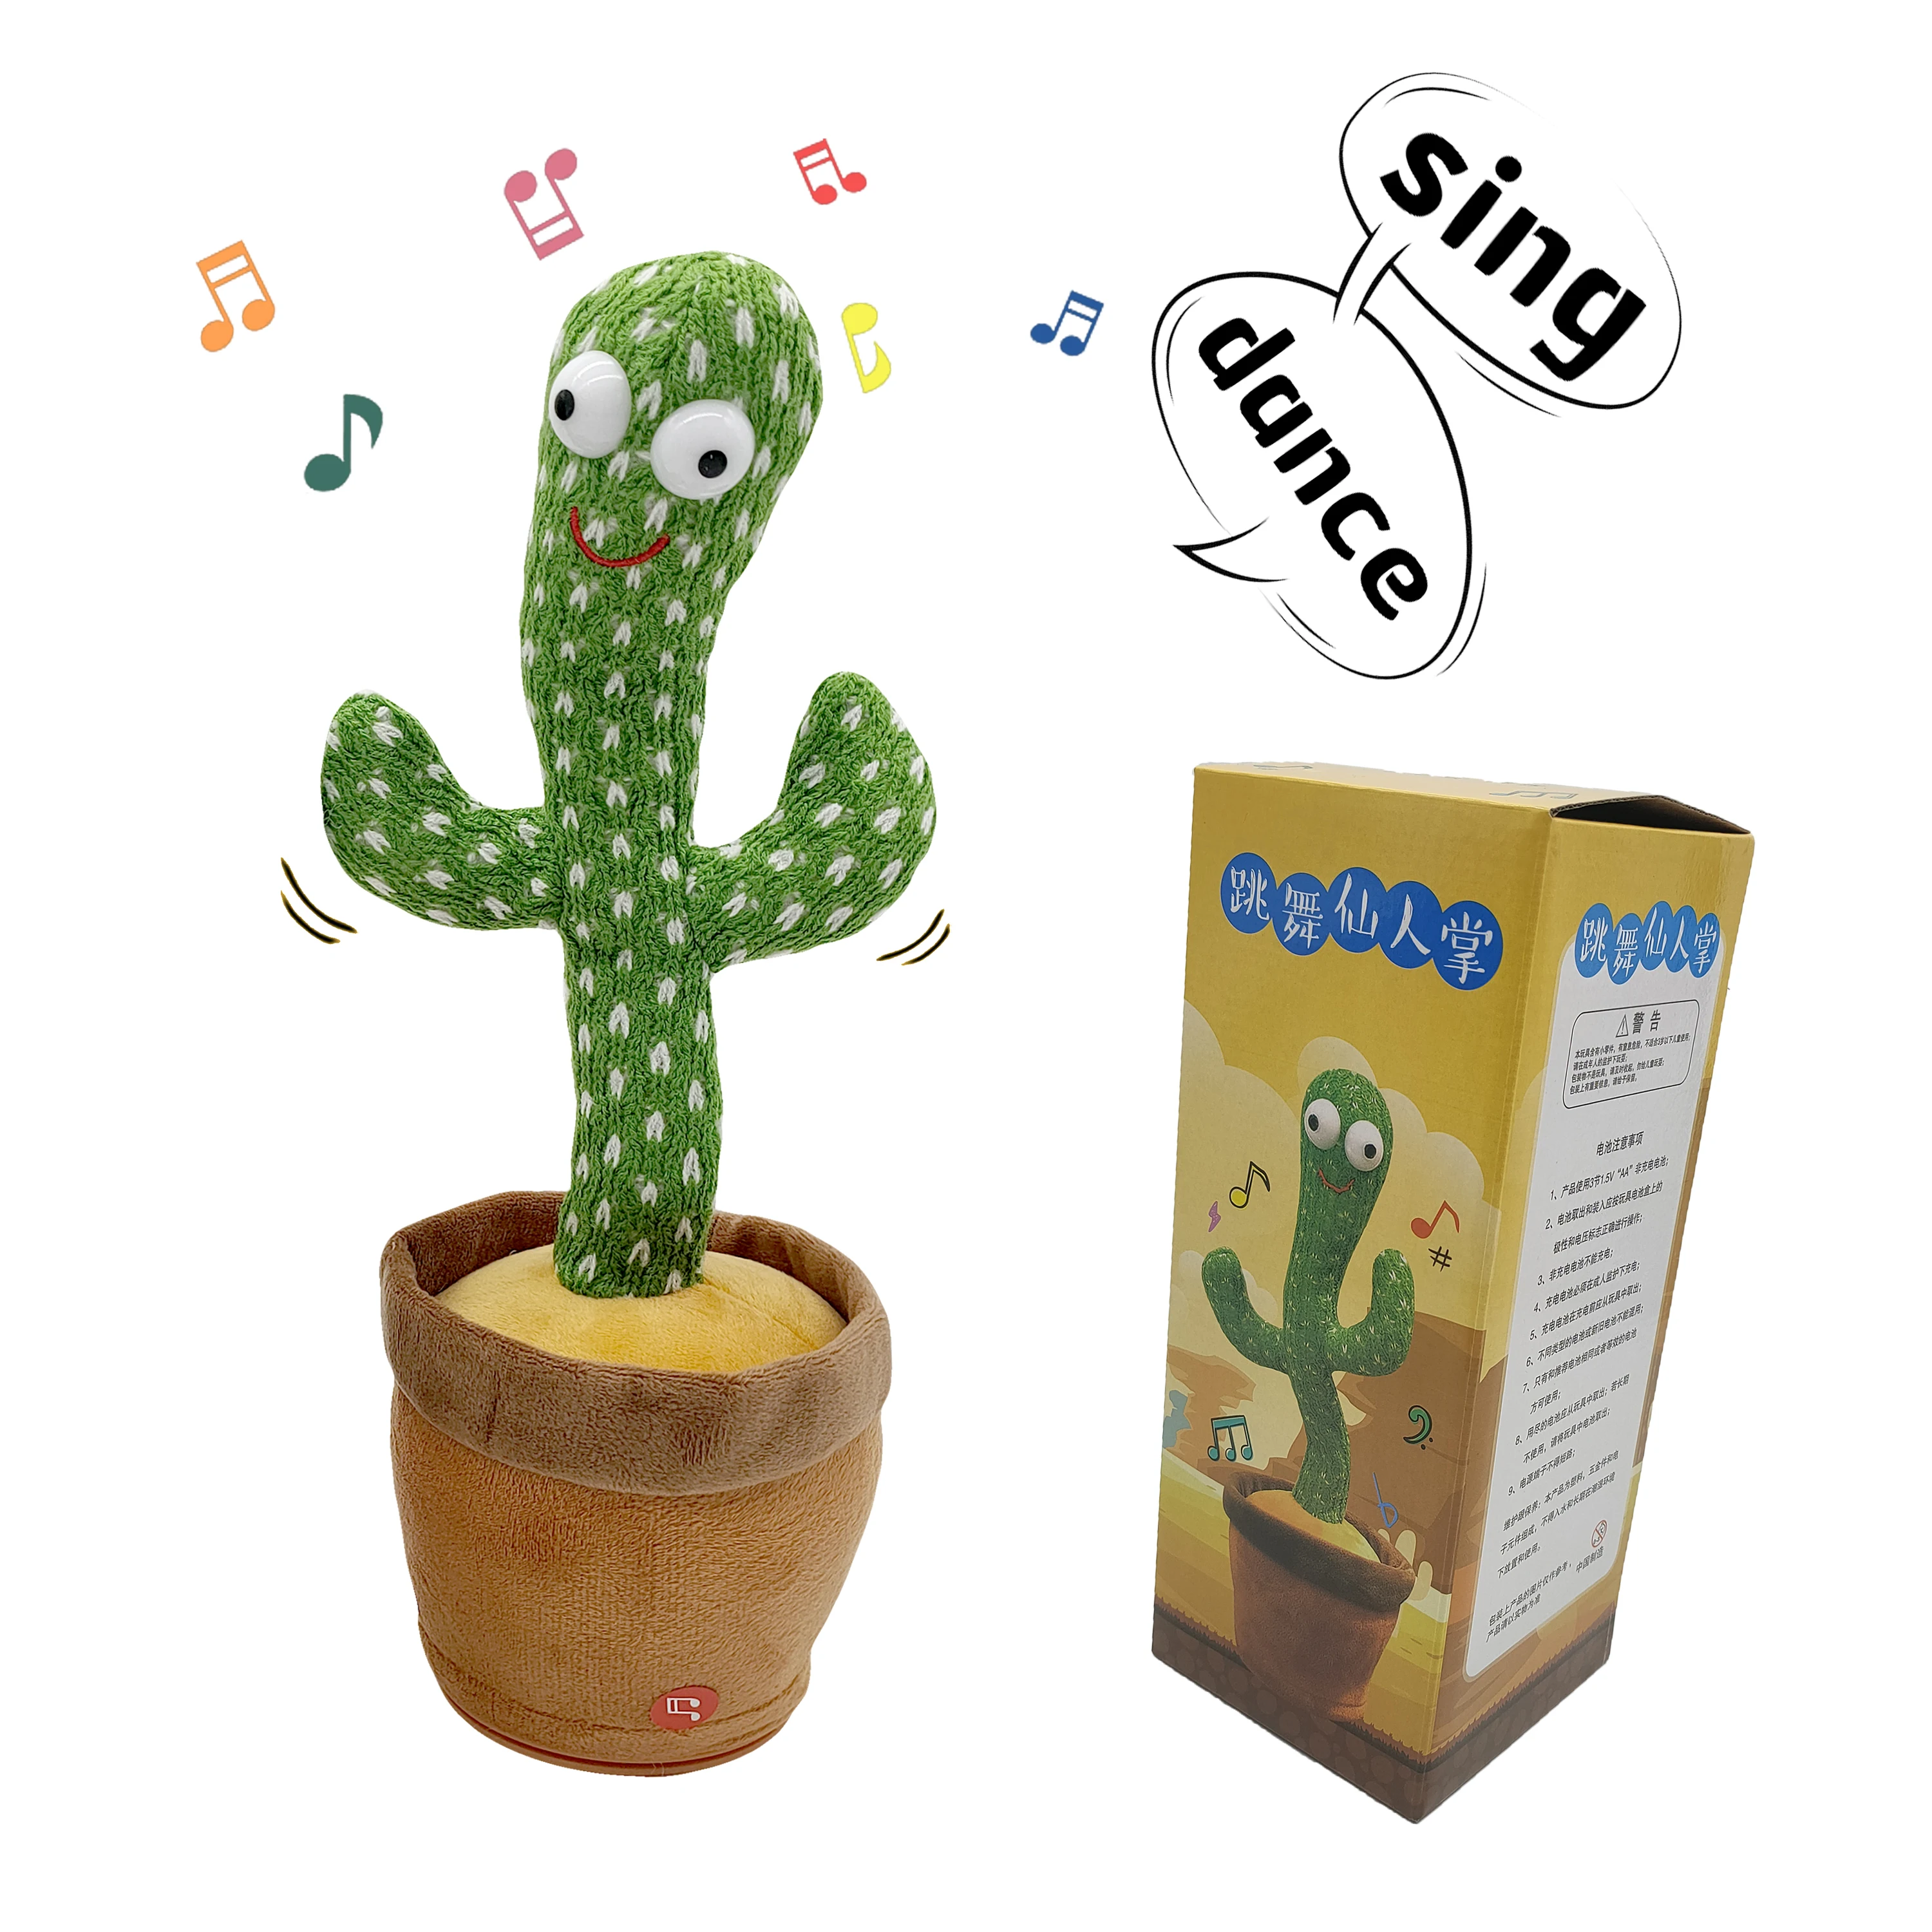 Singing and Glowing Plush Cactus Dancing Cactus Toy 120 Songs Repeating and Recording What You Say Best Gift for Your Baby 